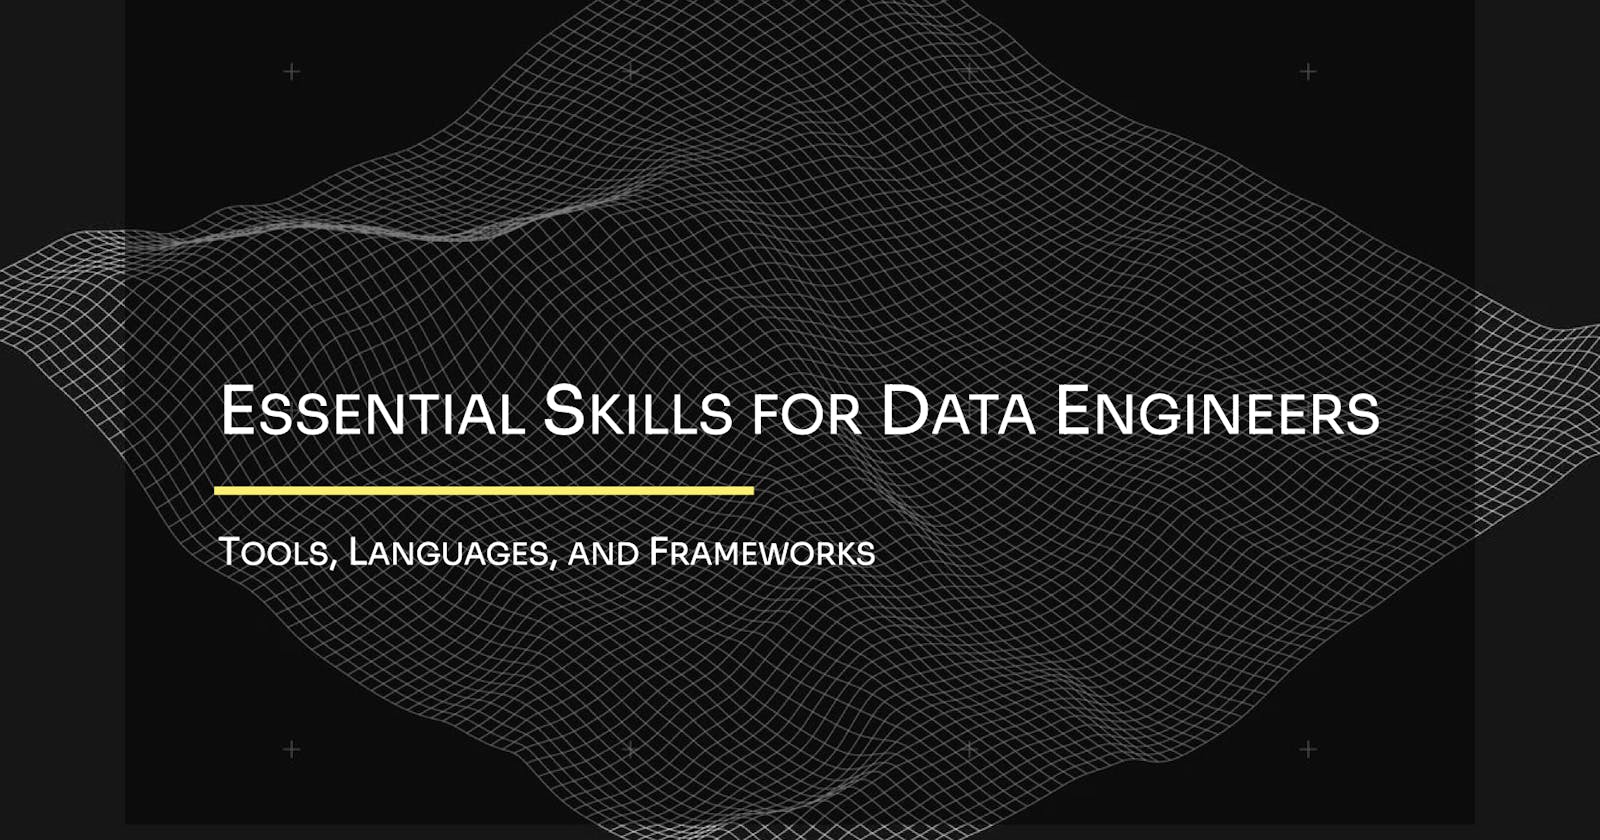 Essential Skills for Data Engineers: Tools, Languages, and Frameworks